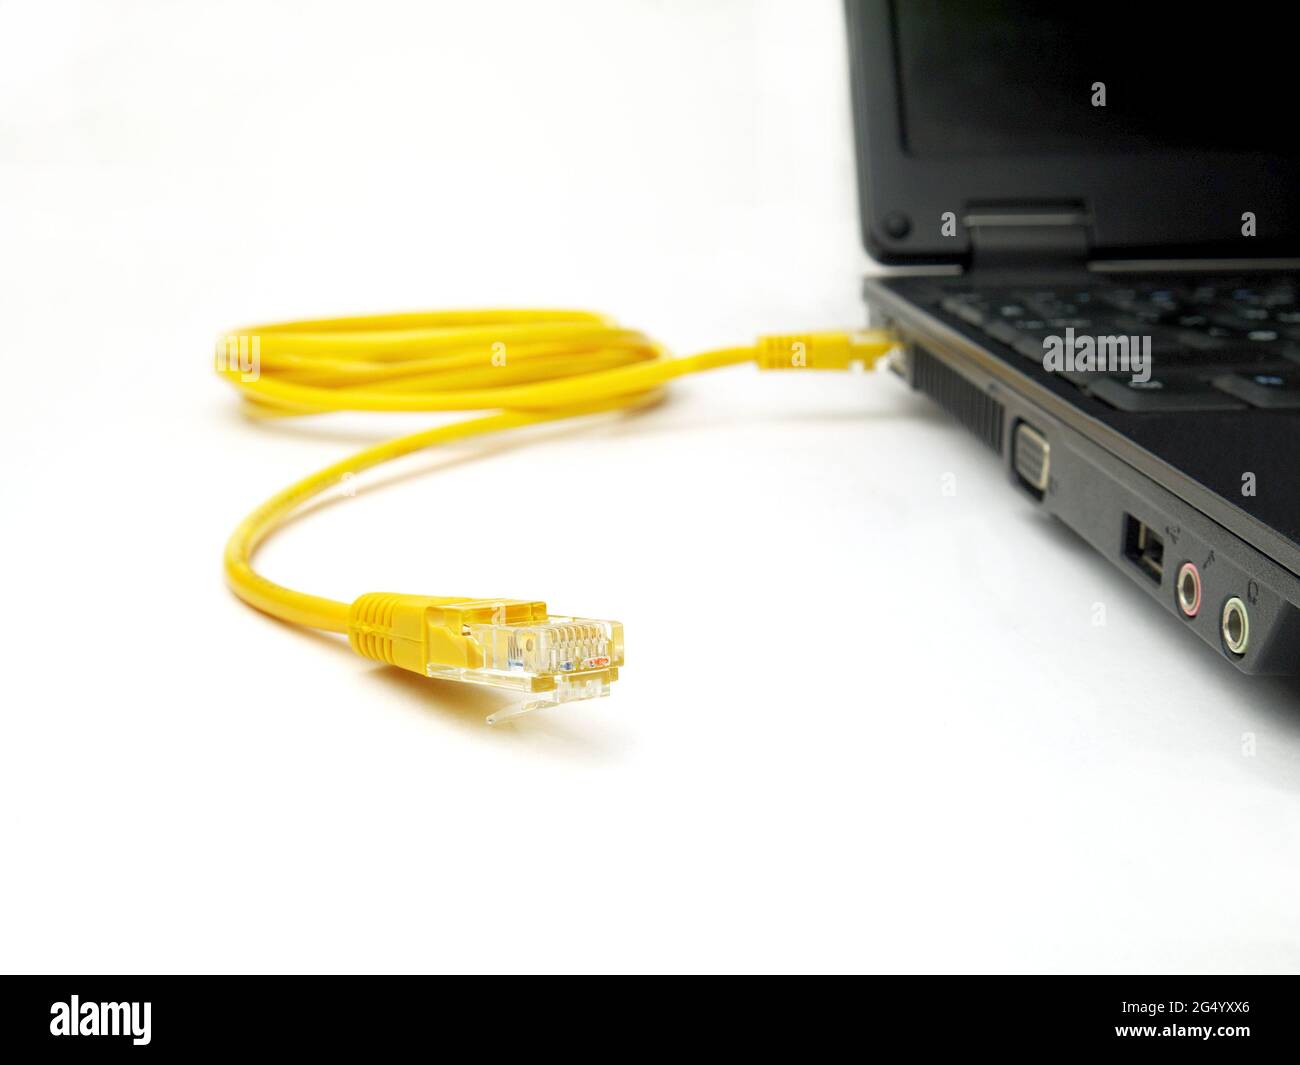 yellow twisted pair ethernet network cable connected to laptop, closeup, white background, focus on unplugged network connector Stock Photo